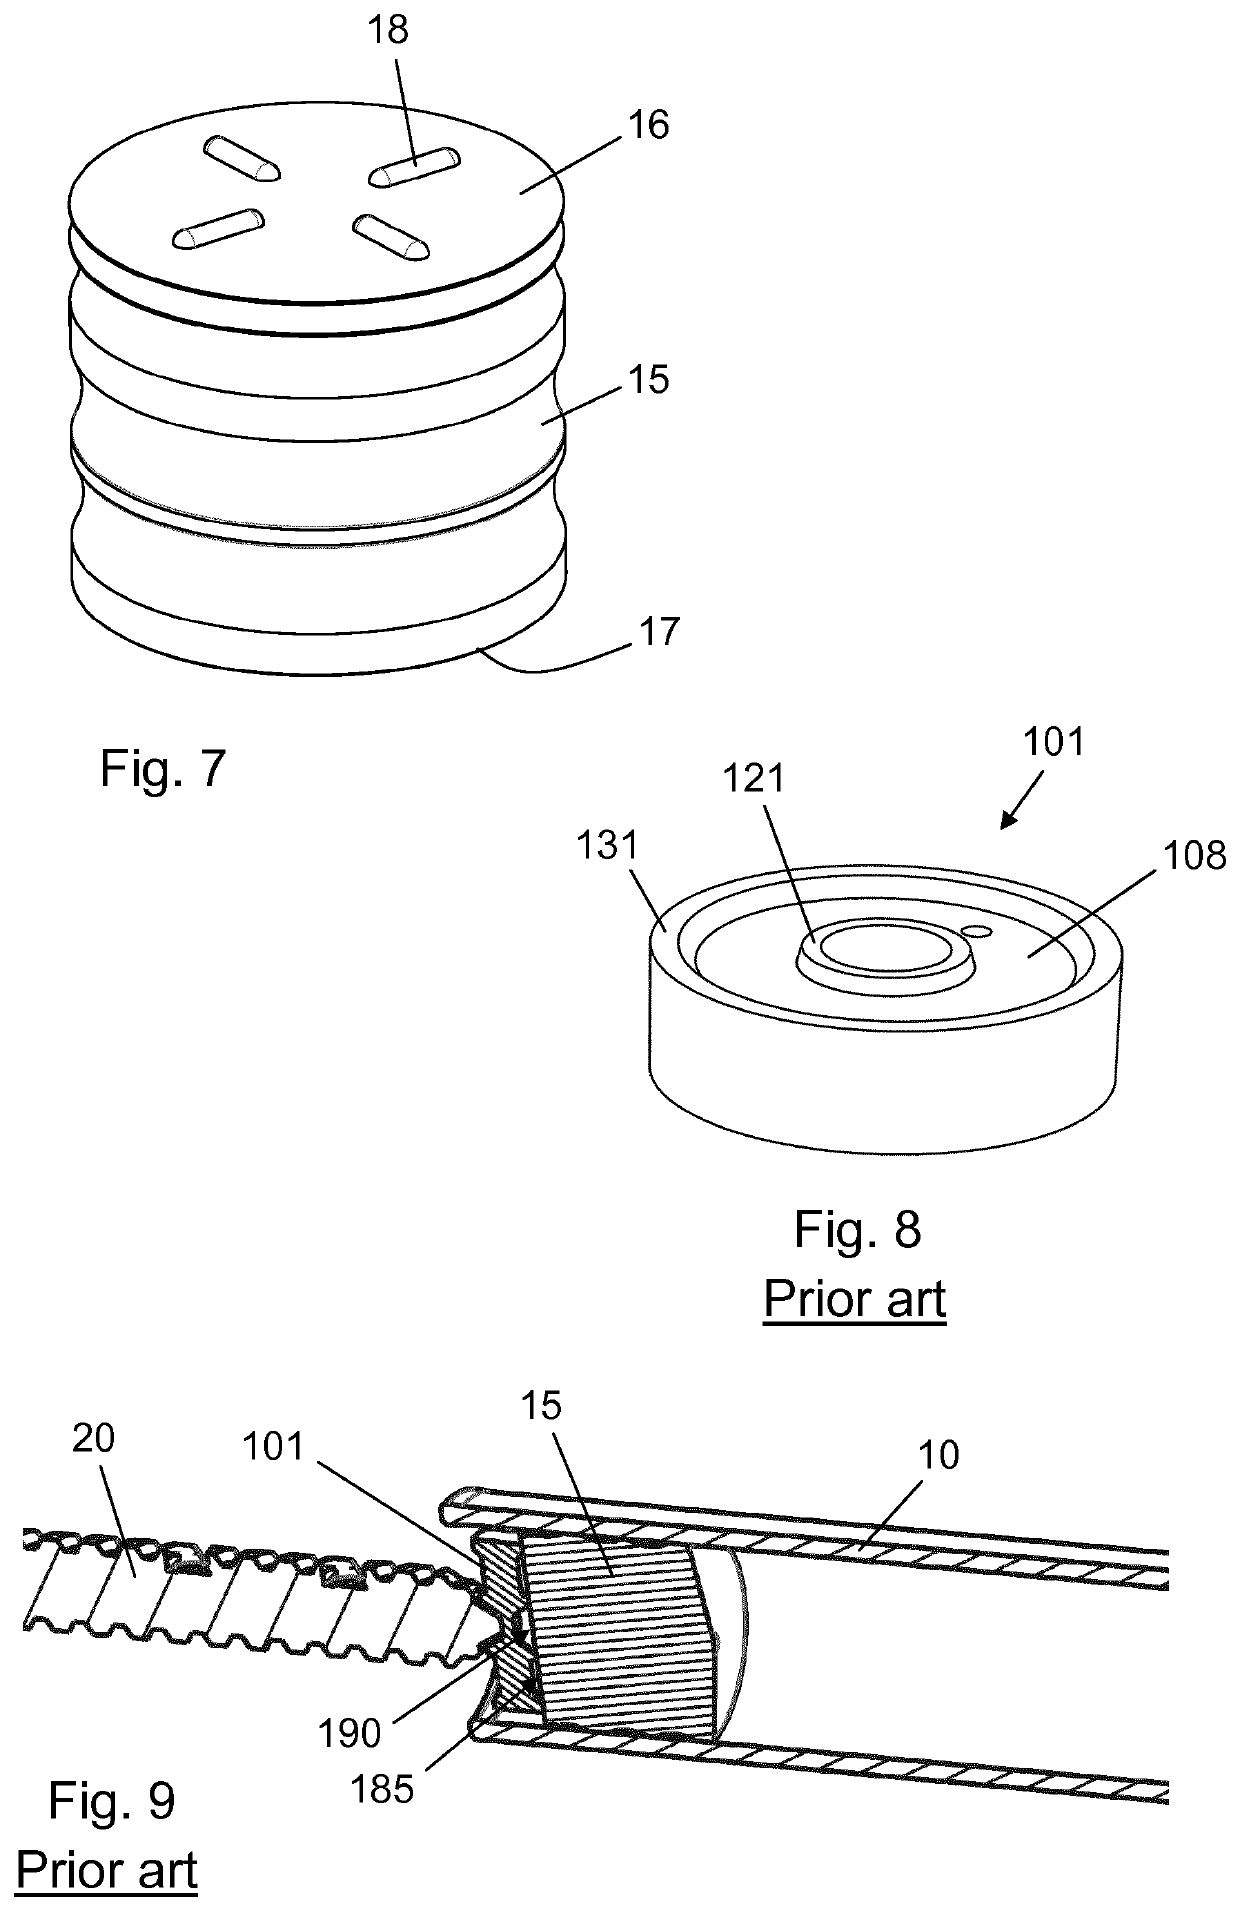 Deformable piston washer